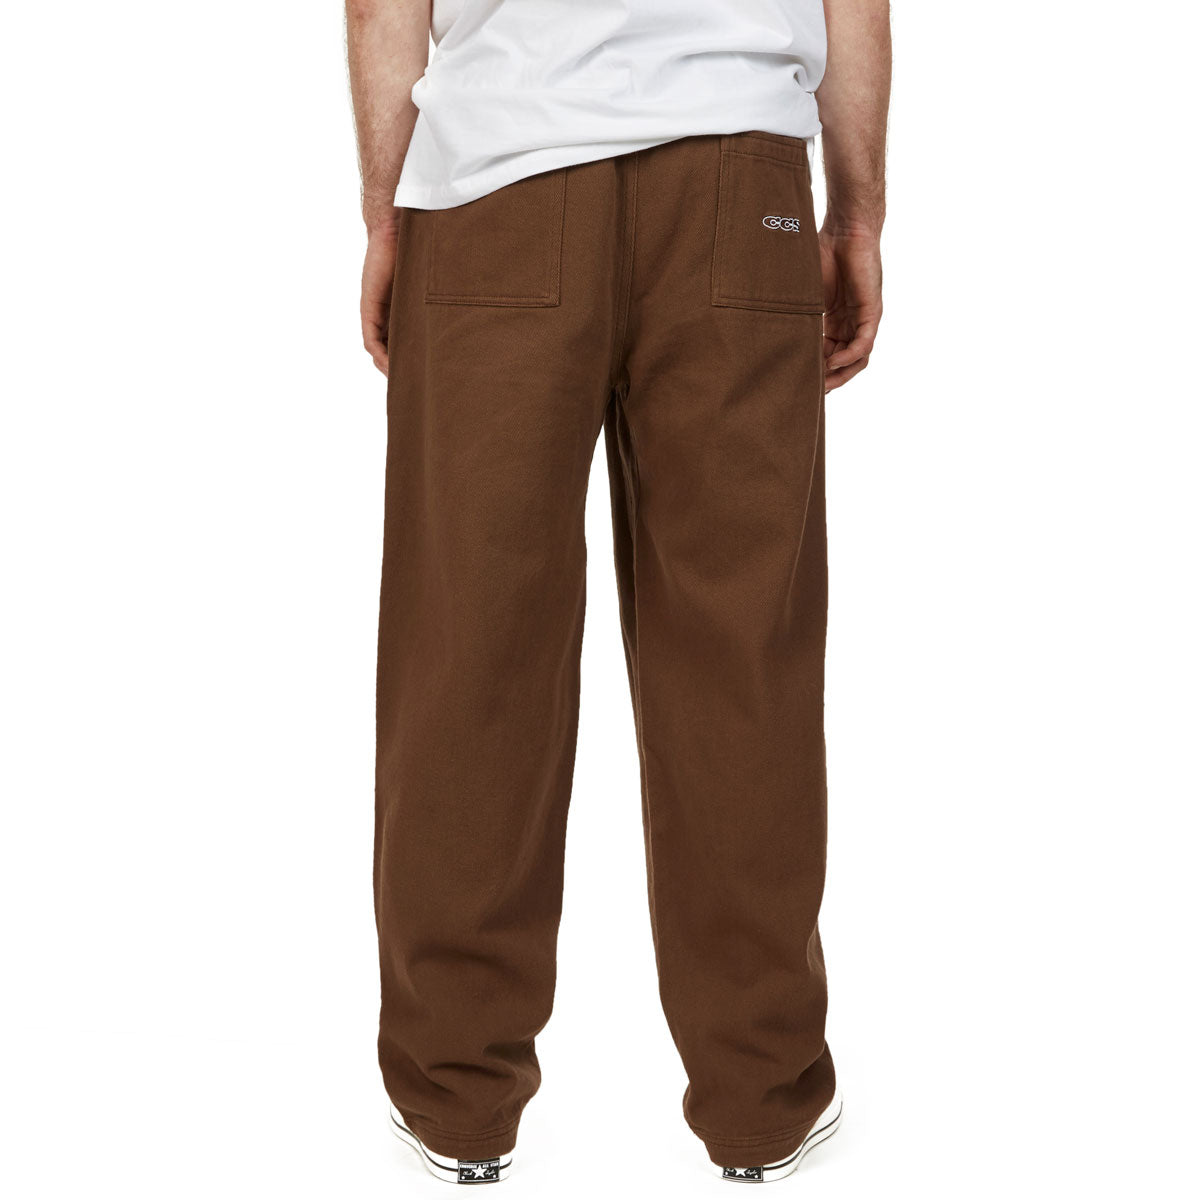 CCS Easy Twill Pants - New Brown image 3